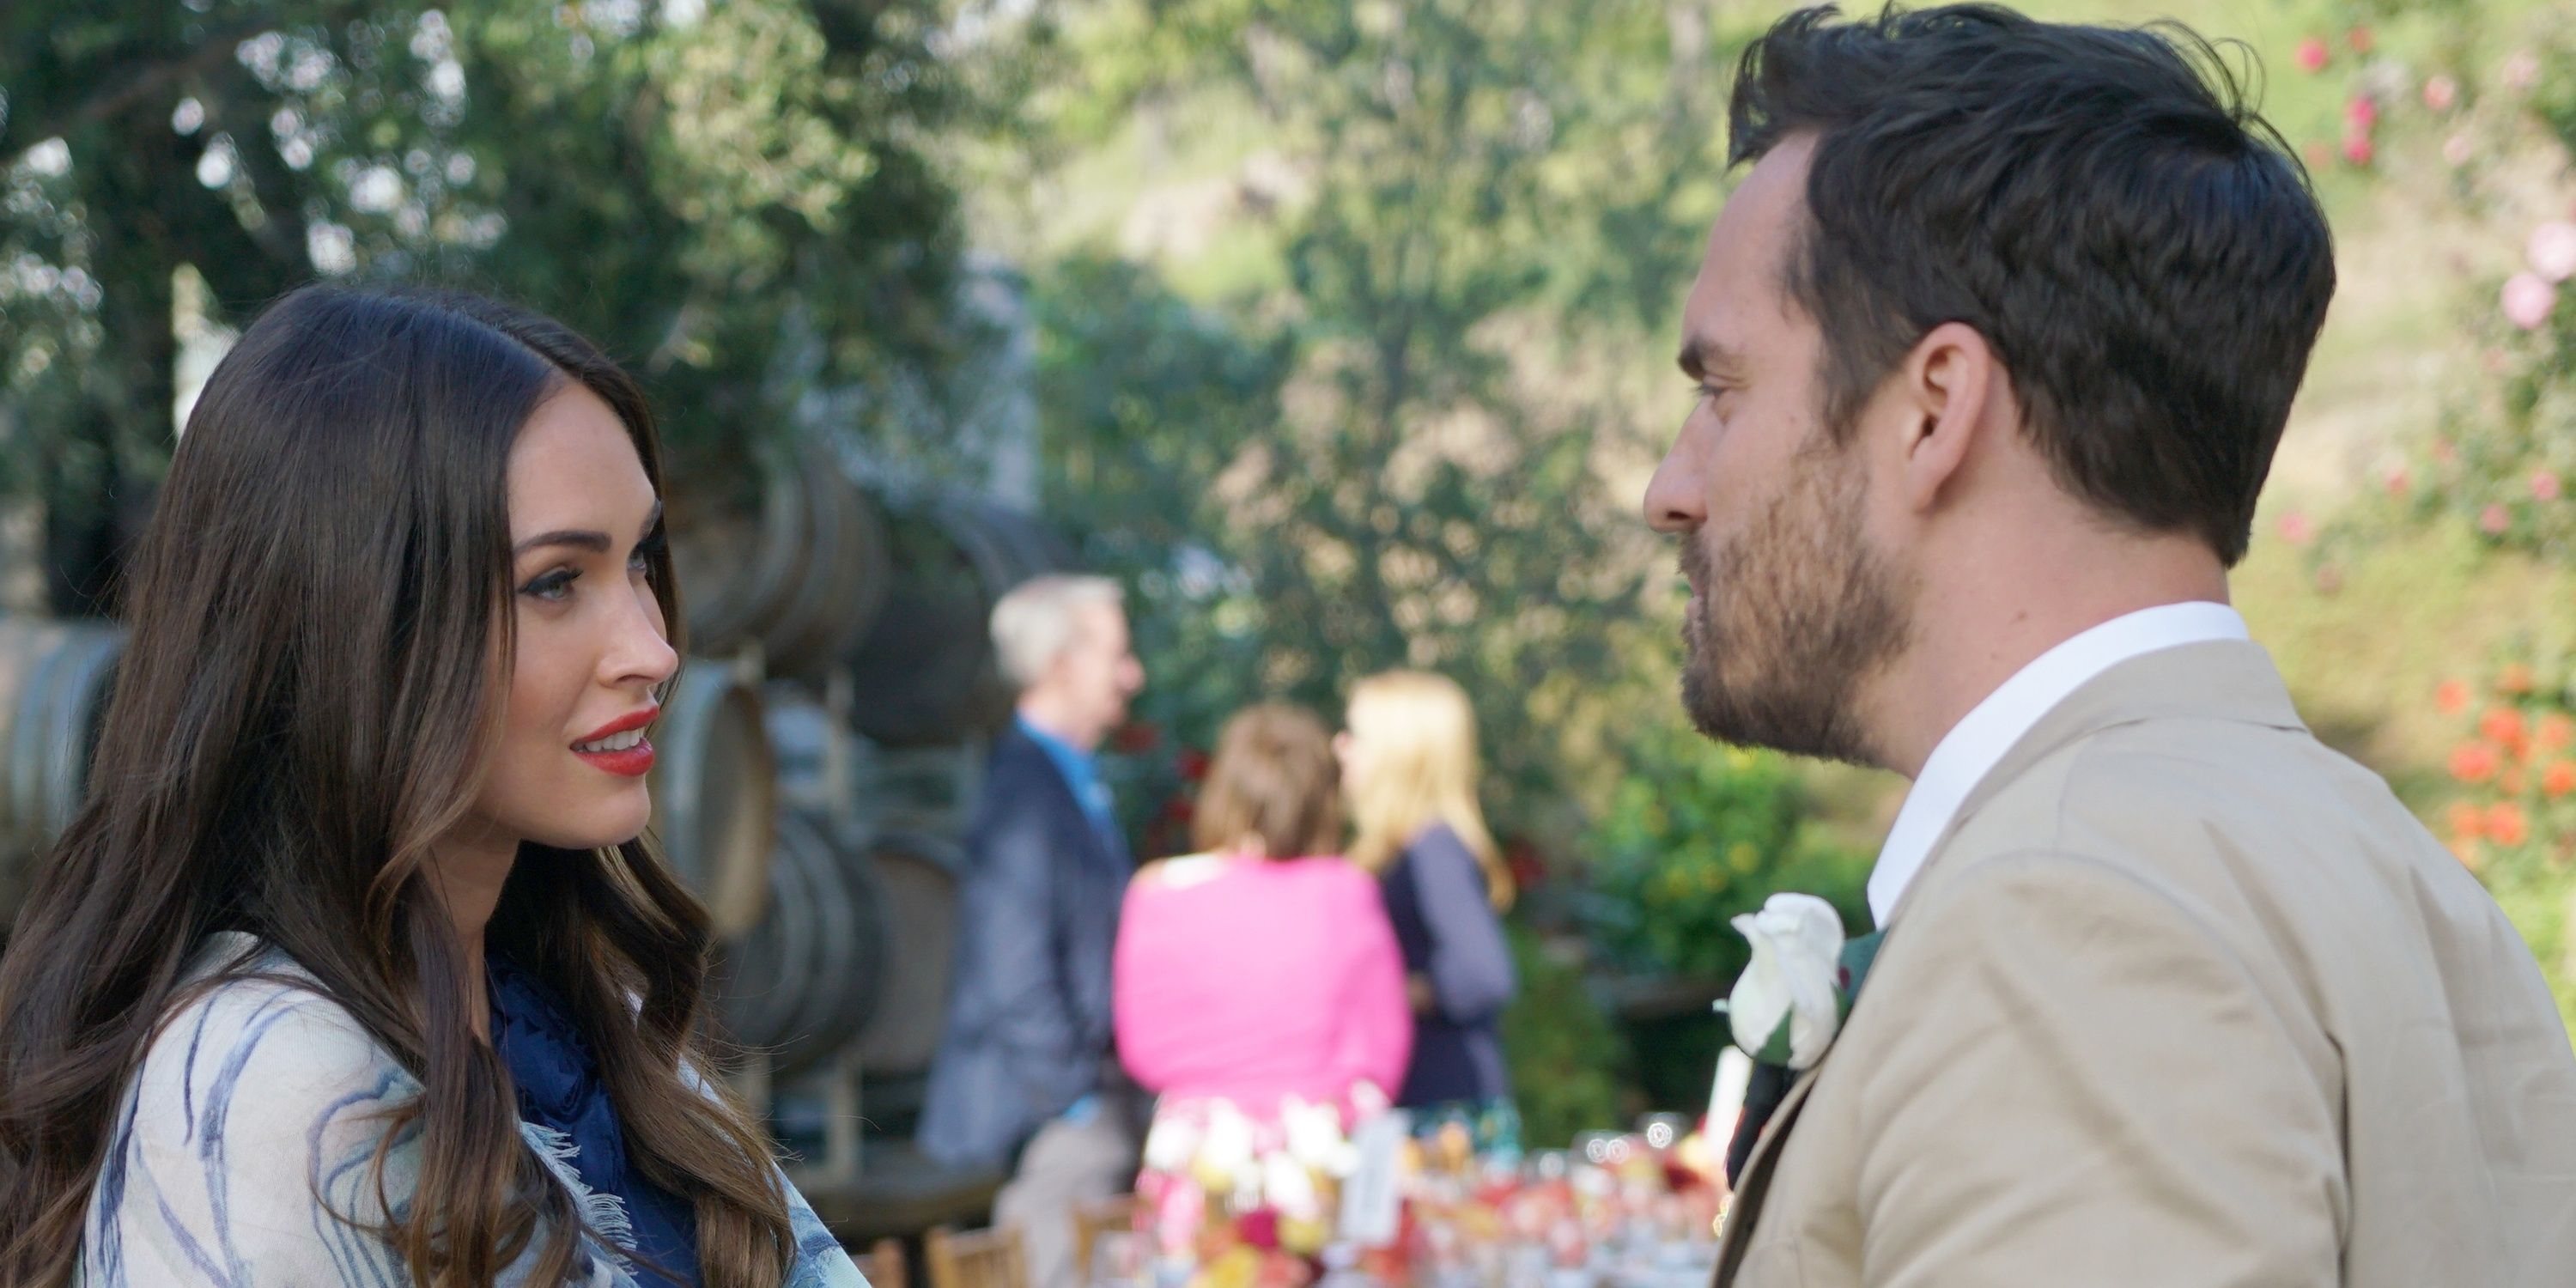 Reagan and Nick attend Cece's wedding in New Girl